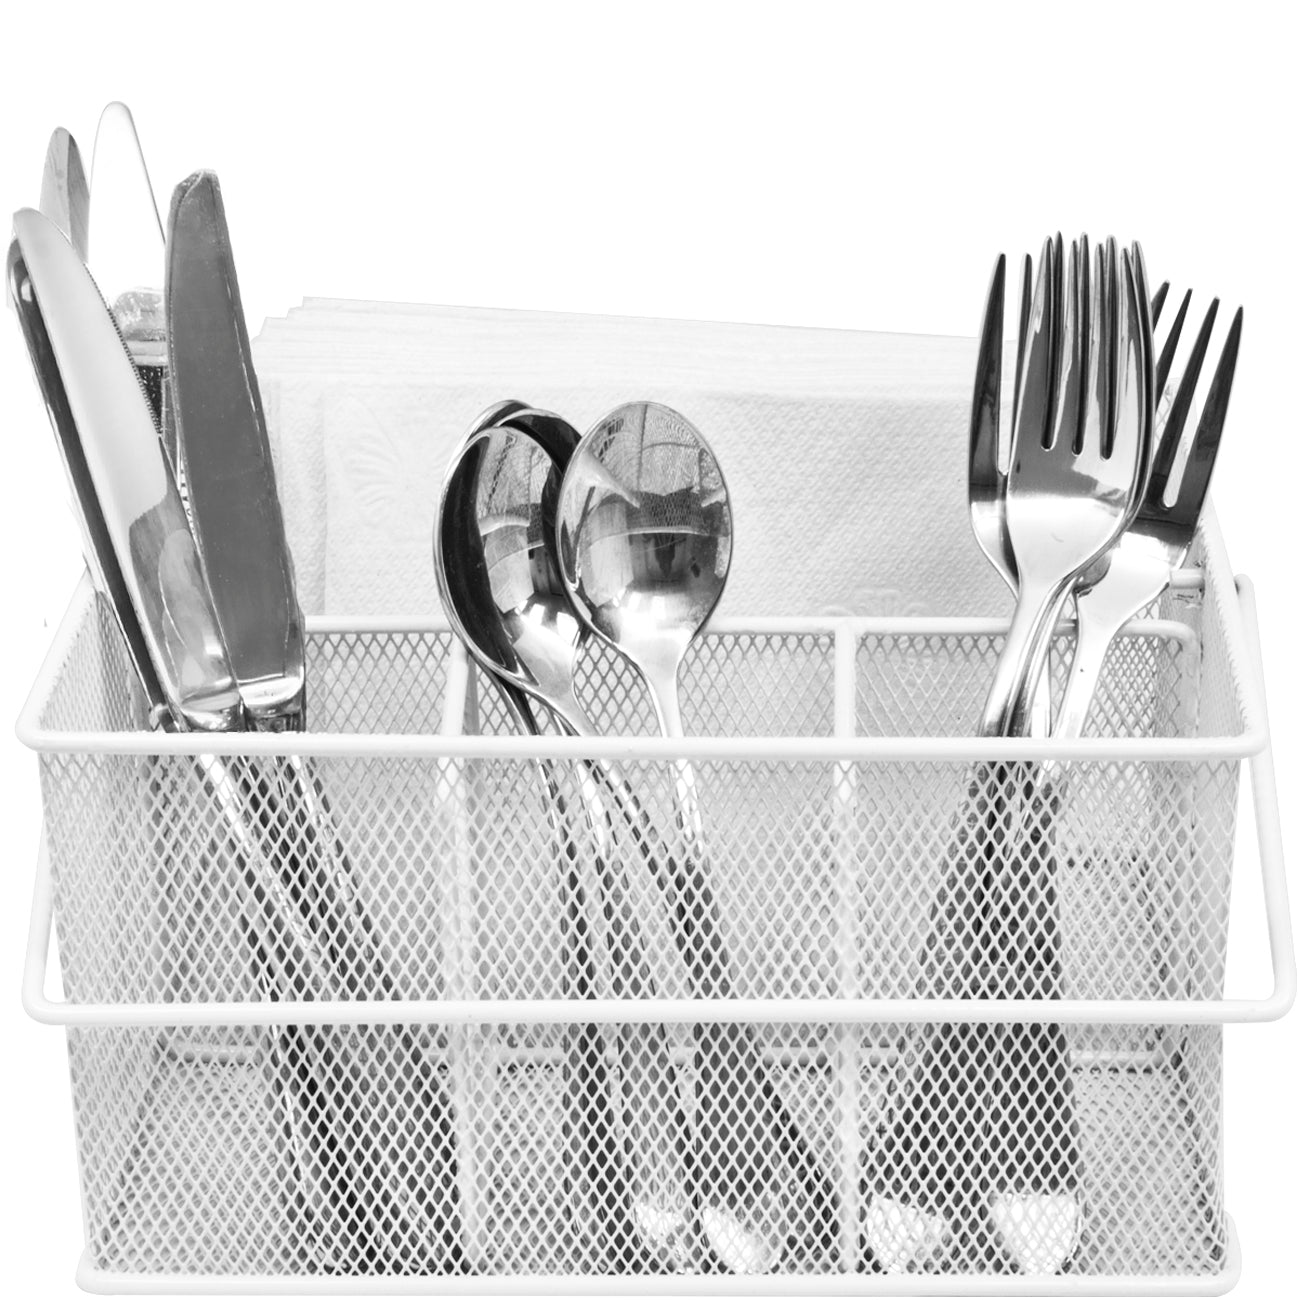 Black Metal Mesh Kitchen, Picnic Buffet Caddy for Utensils, Plates, and Napkins with Handle